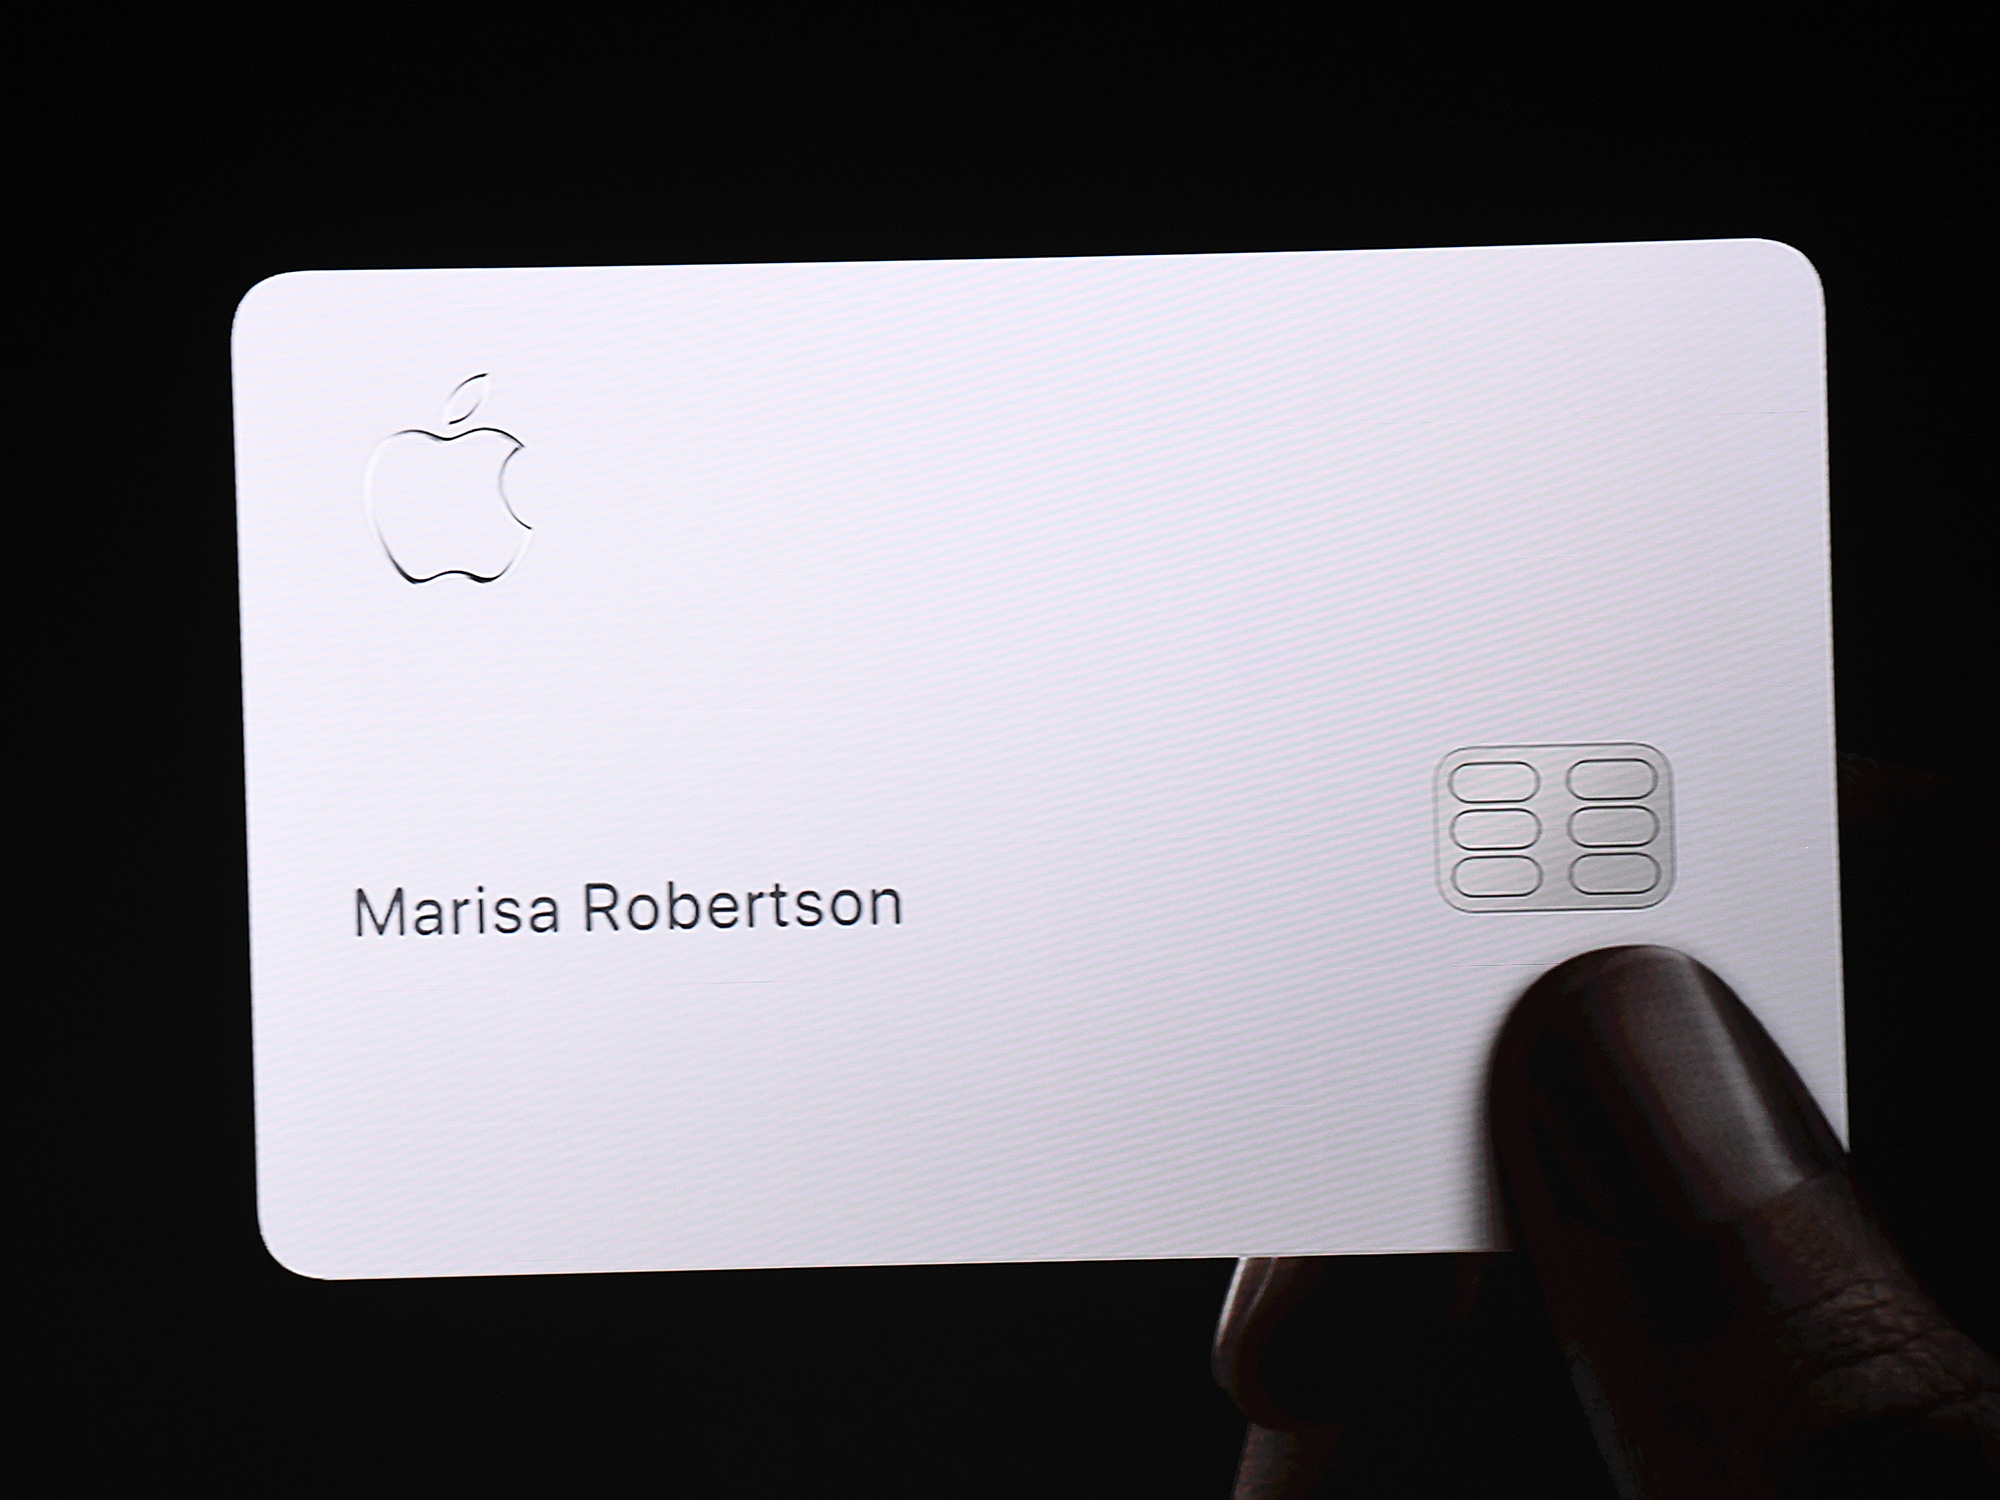 Apple Card With Goldman Sachs Some Faces Credit Limit Application Concerns Bloomberg